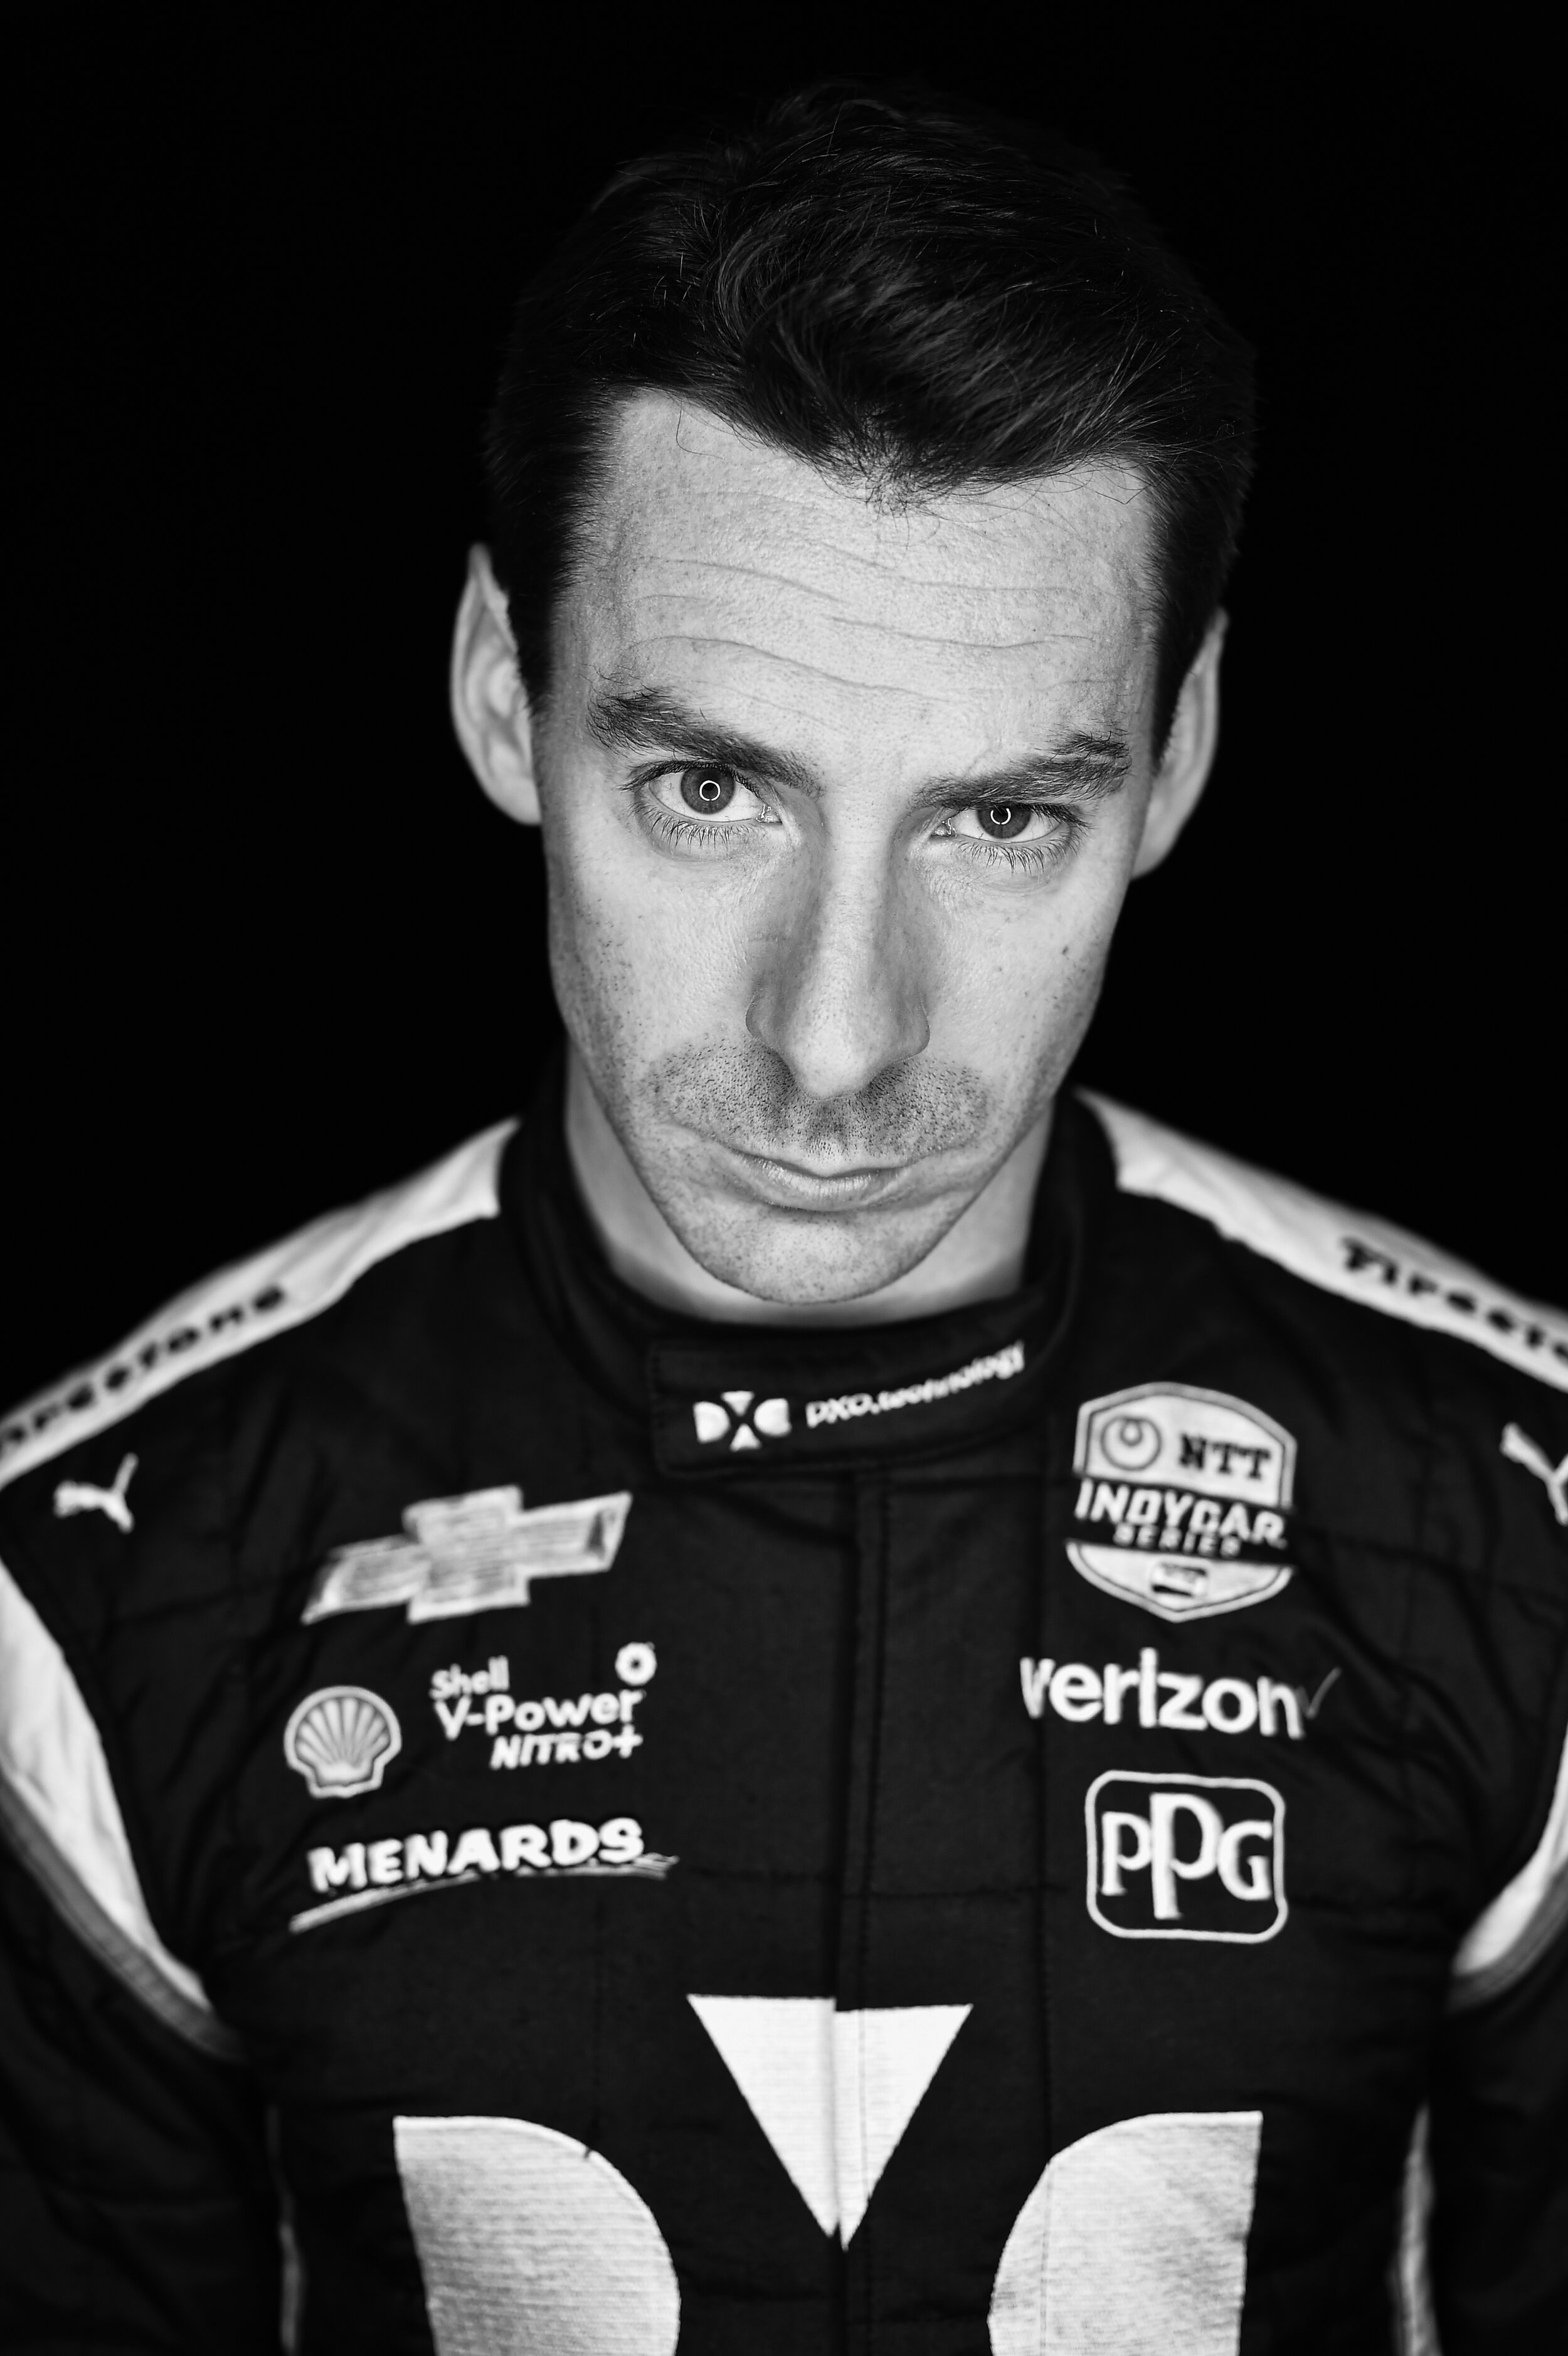  Simon Pagenaud with attitude. Not only is he one of the best drivers in modern times, he’s one of the best guys to work with off track. 